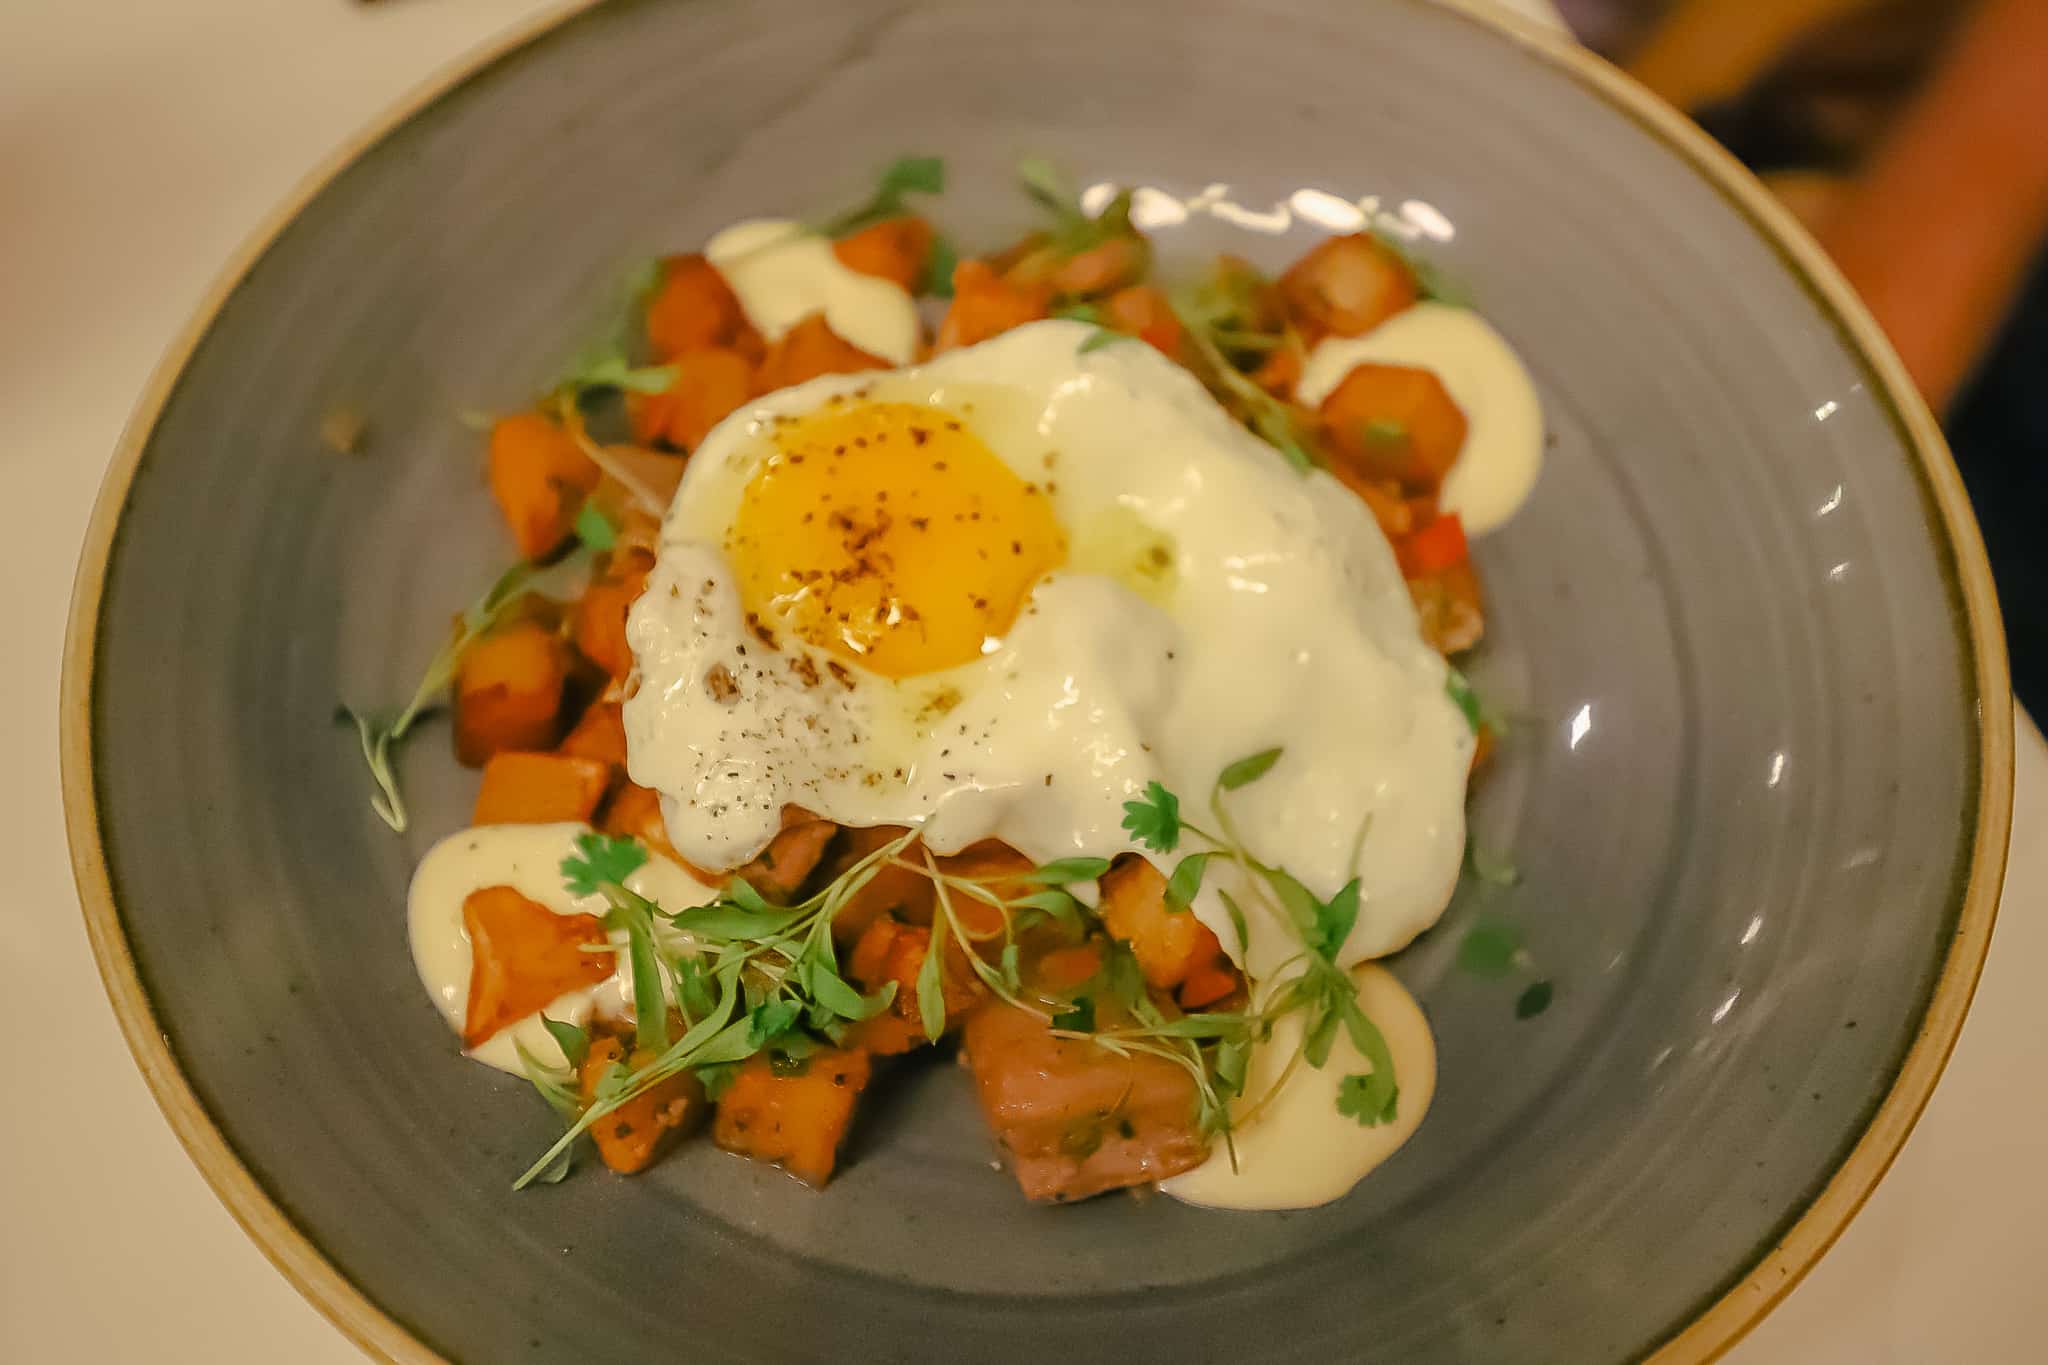 a breakfast hash with potatoes and a runny egg on top